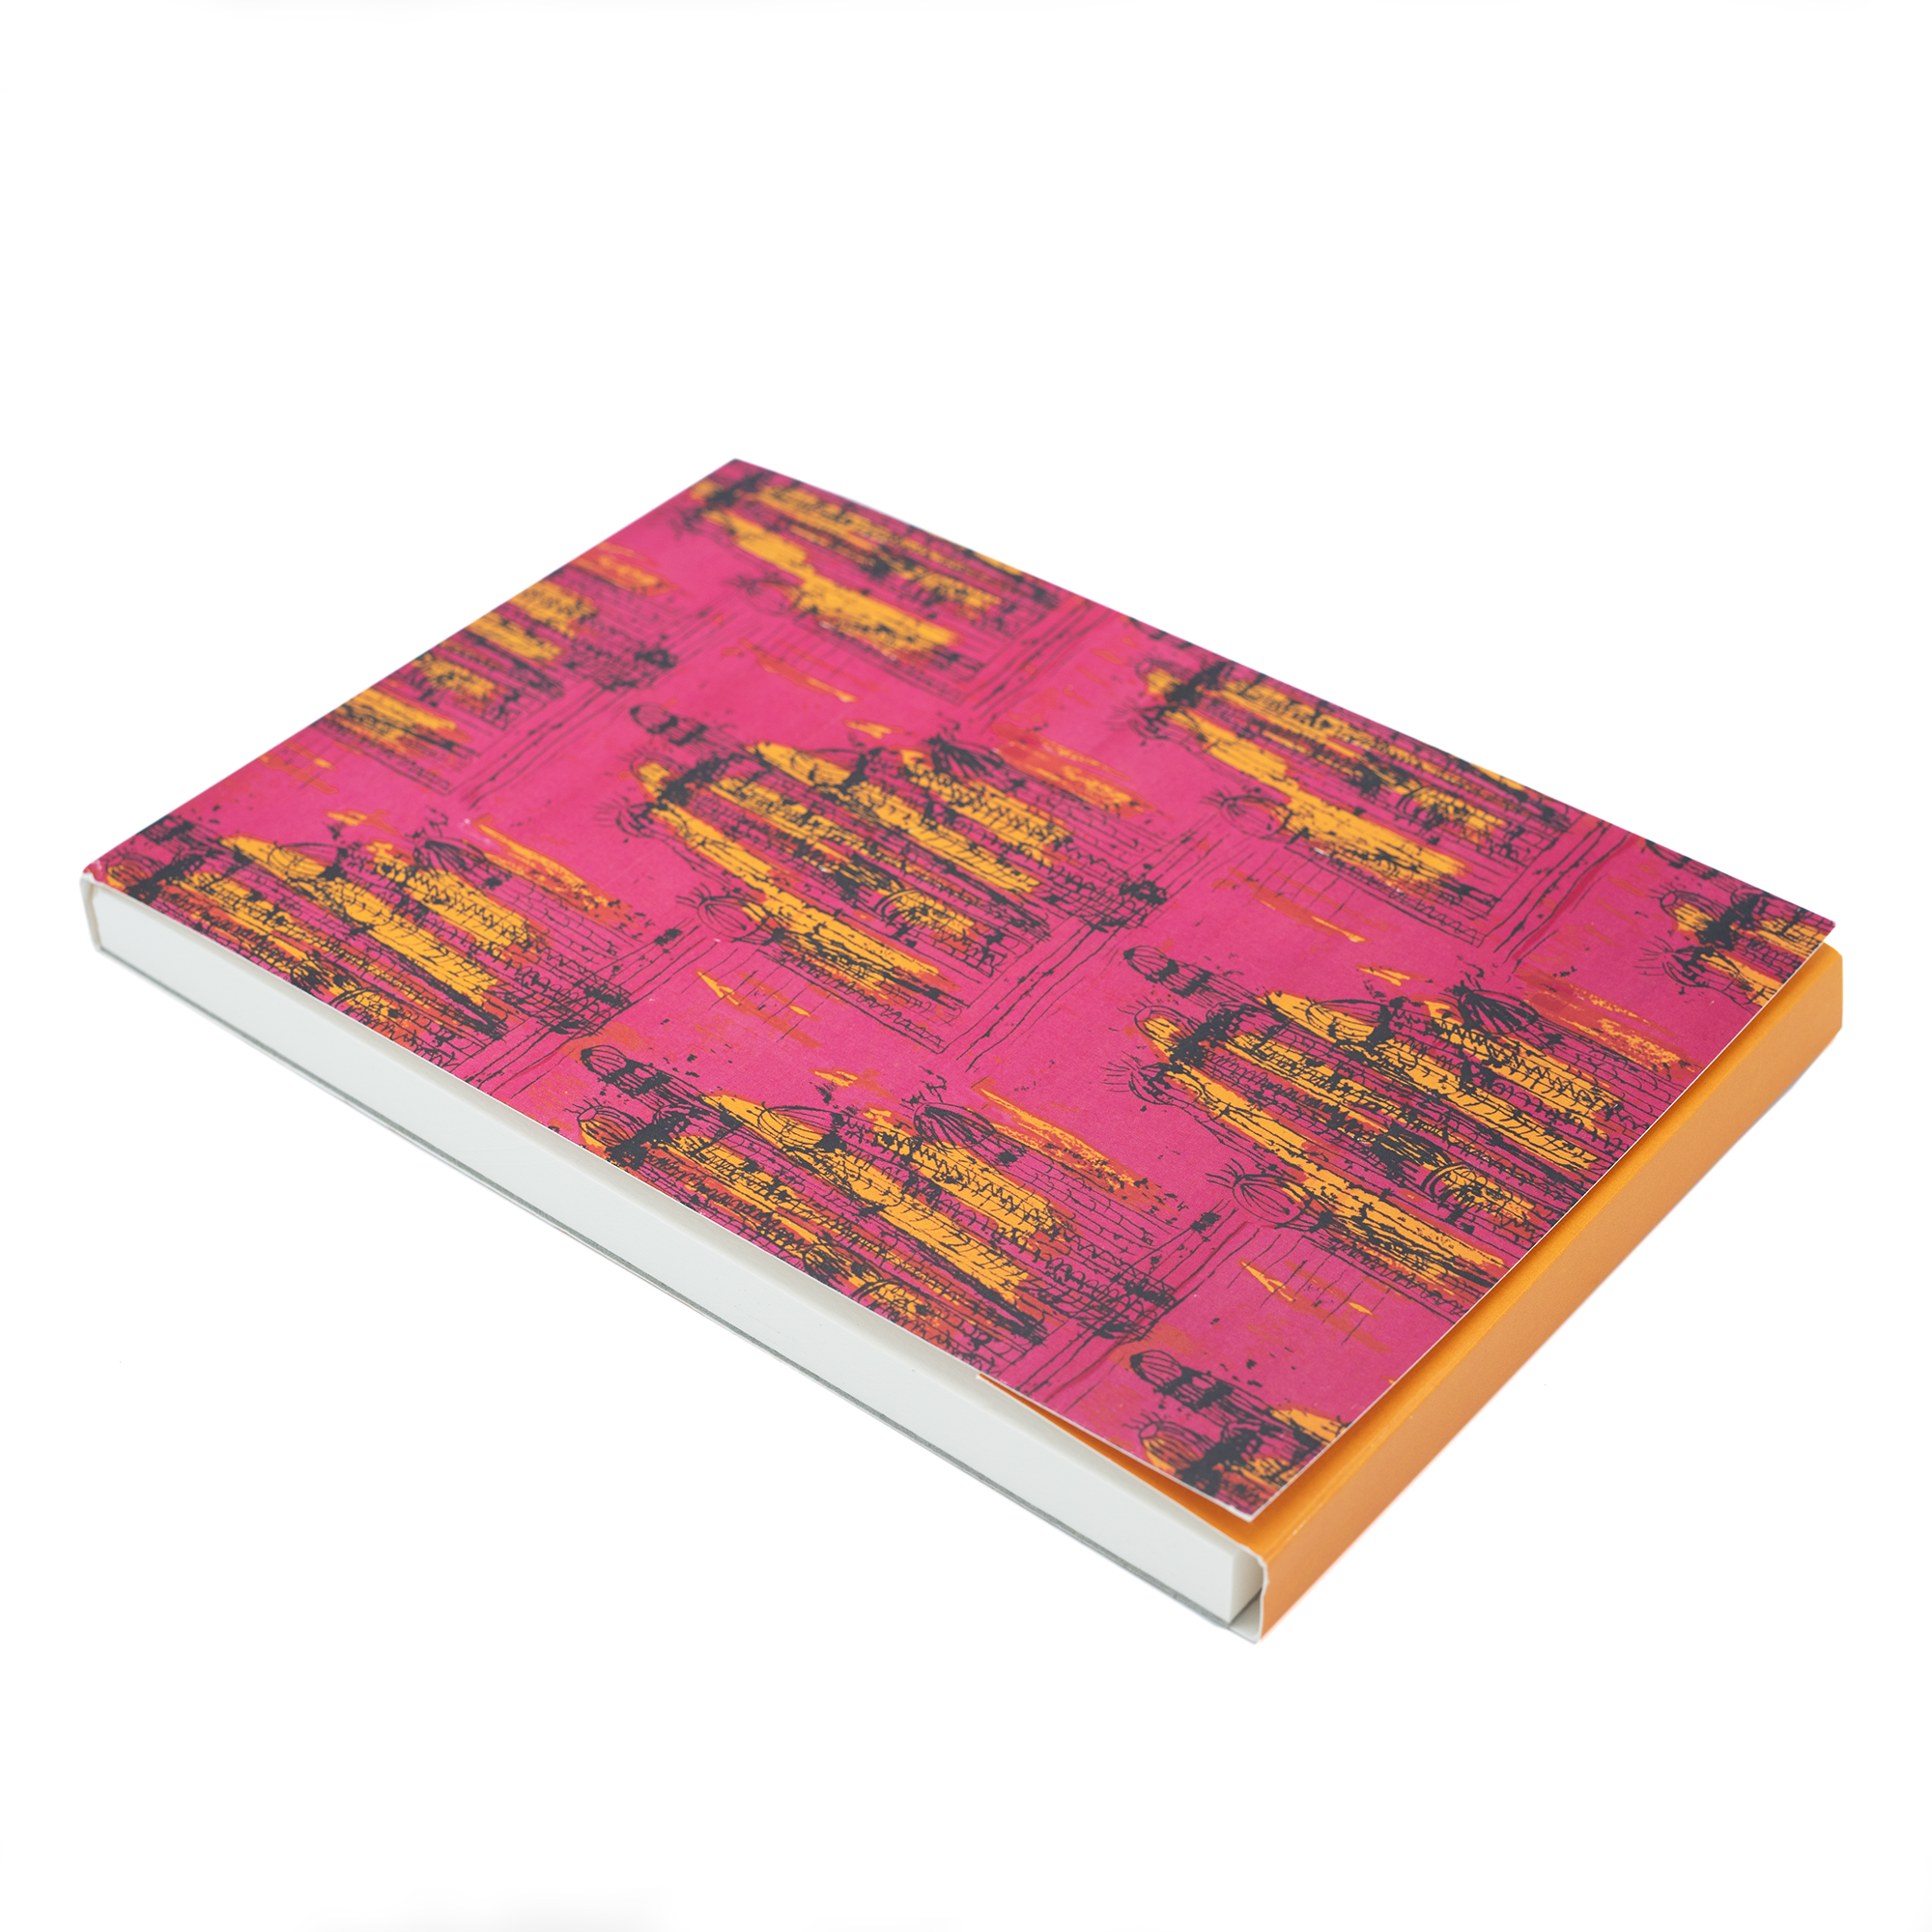 Image of an A5 Sketchpad against a white background. The front cover is a pink, yellow and orange textile design by Althea McNish: 'Painted Desert'